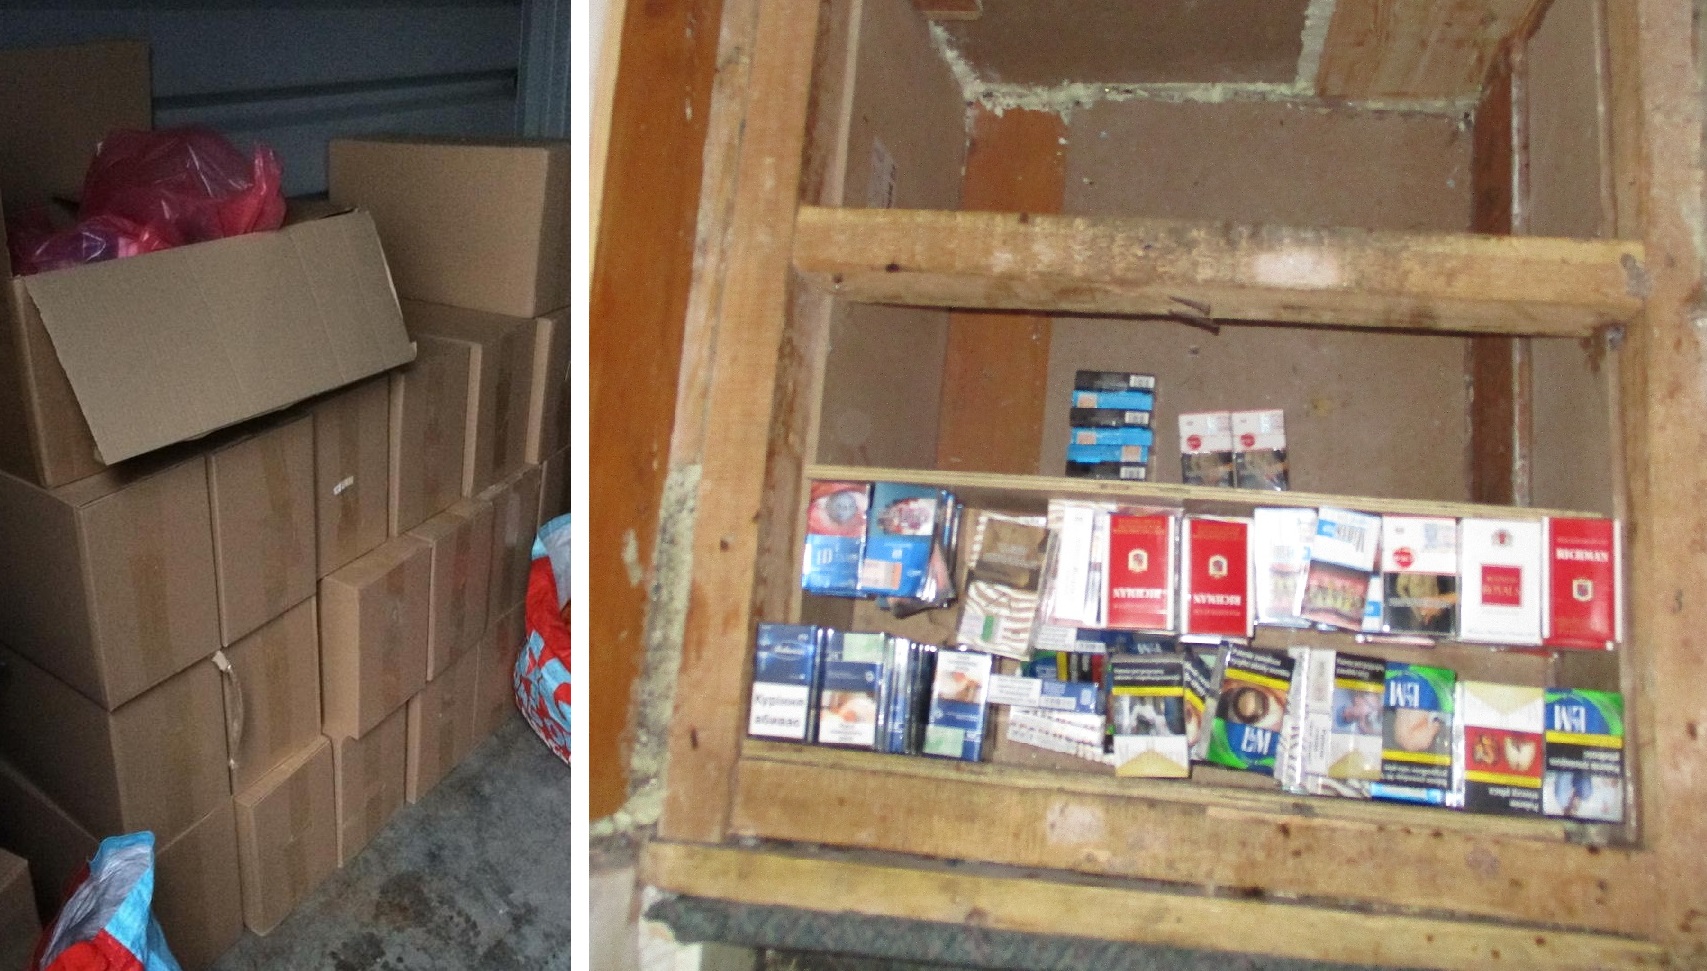 Illegal cigarettes found in Hull